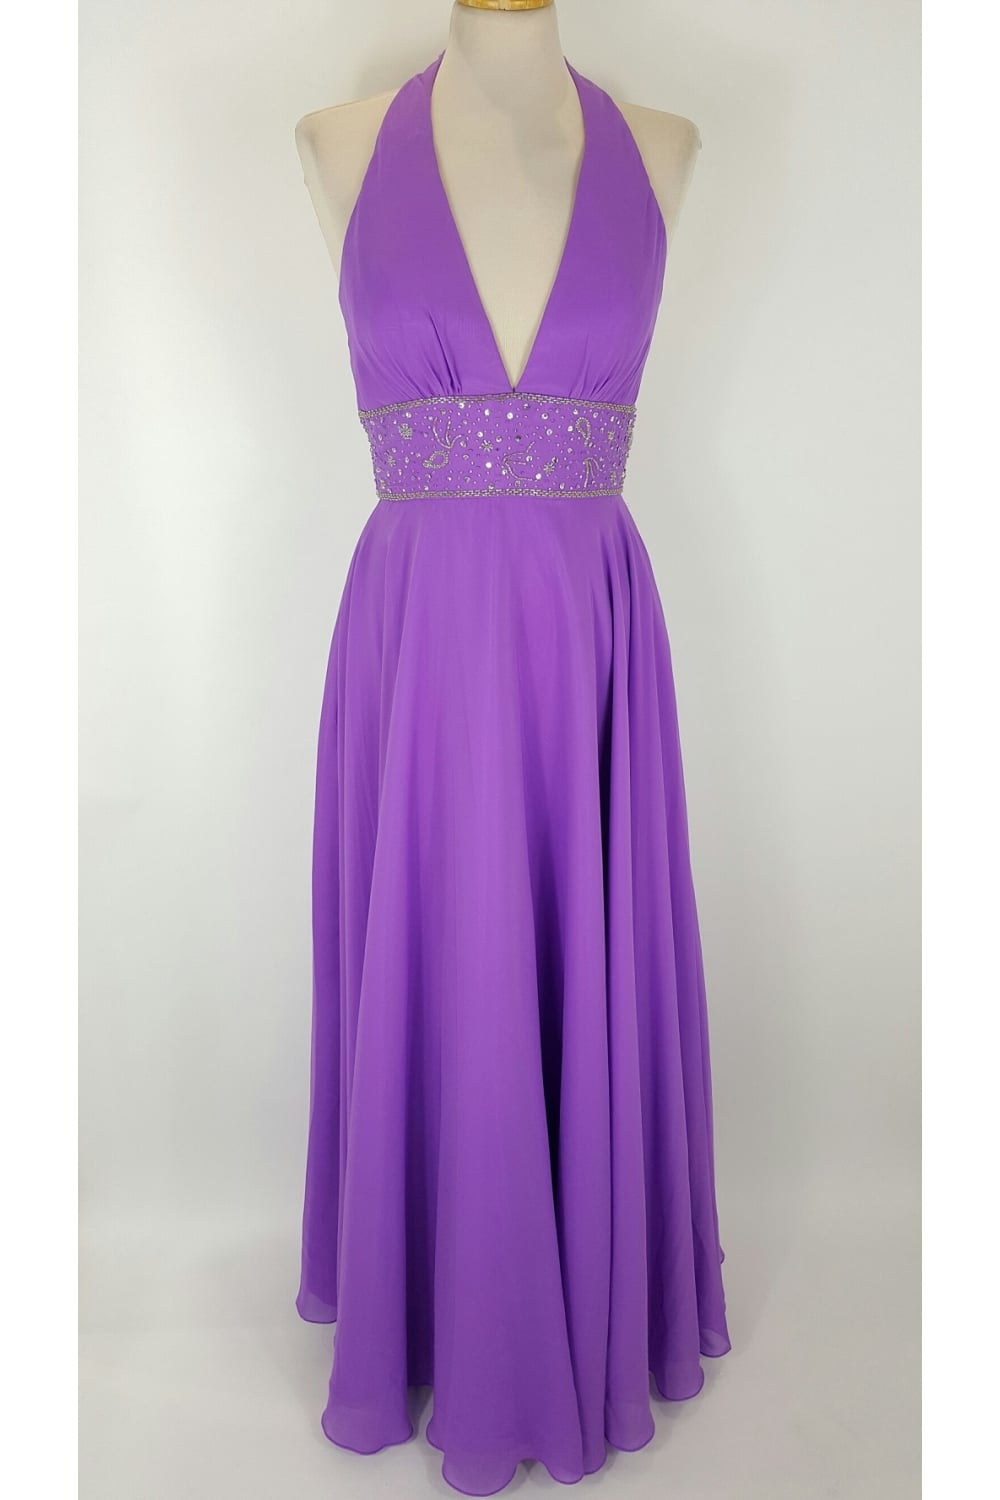 Full Length Purple Dress And Perfect Choices